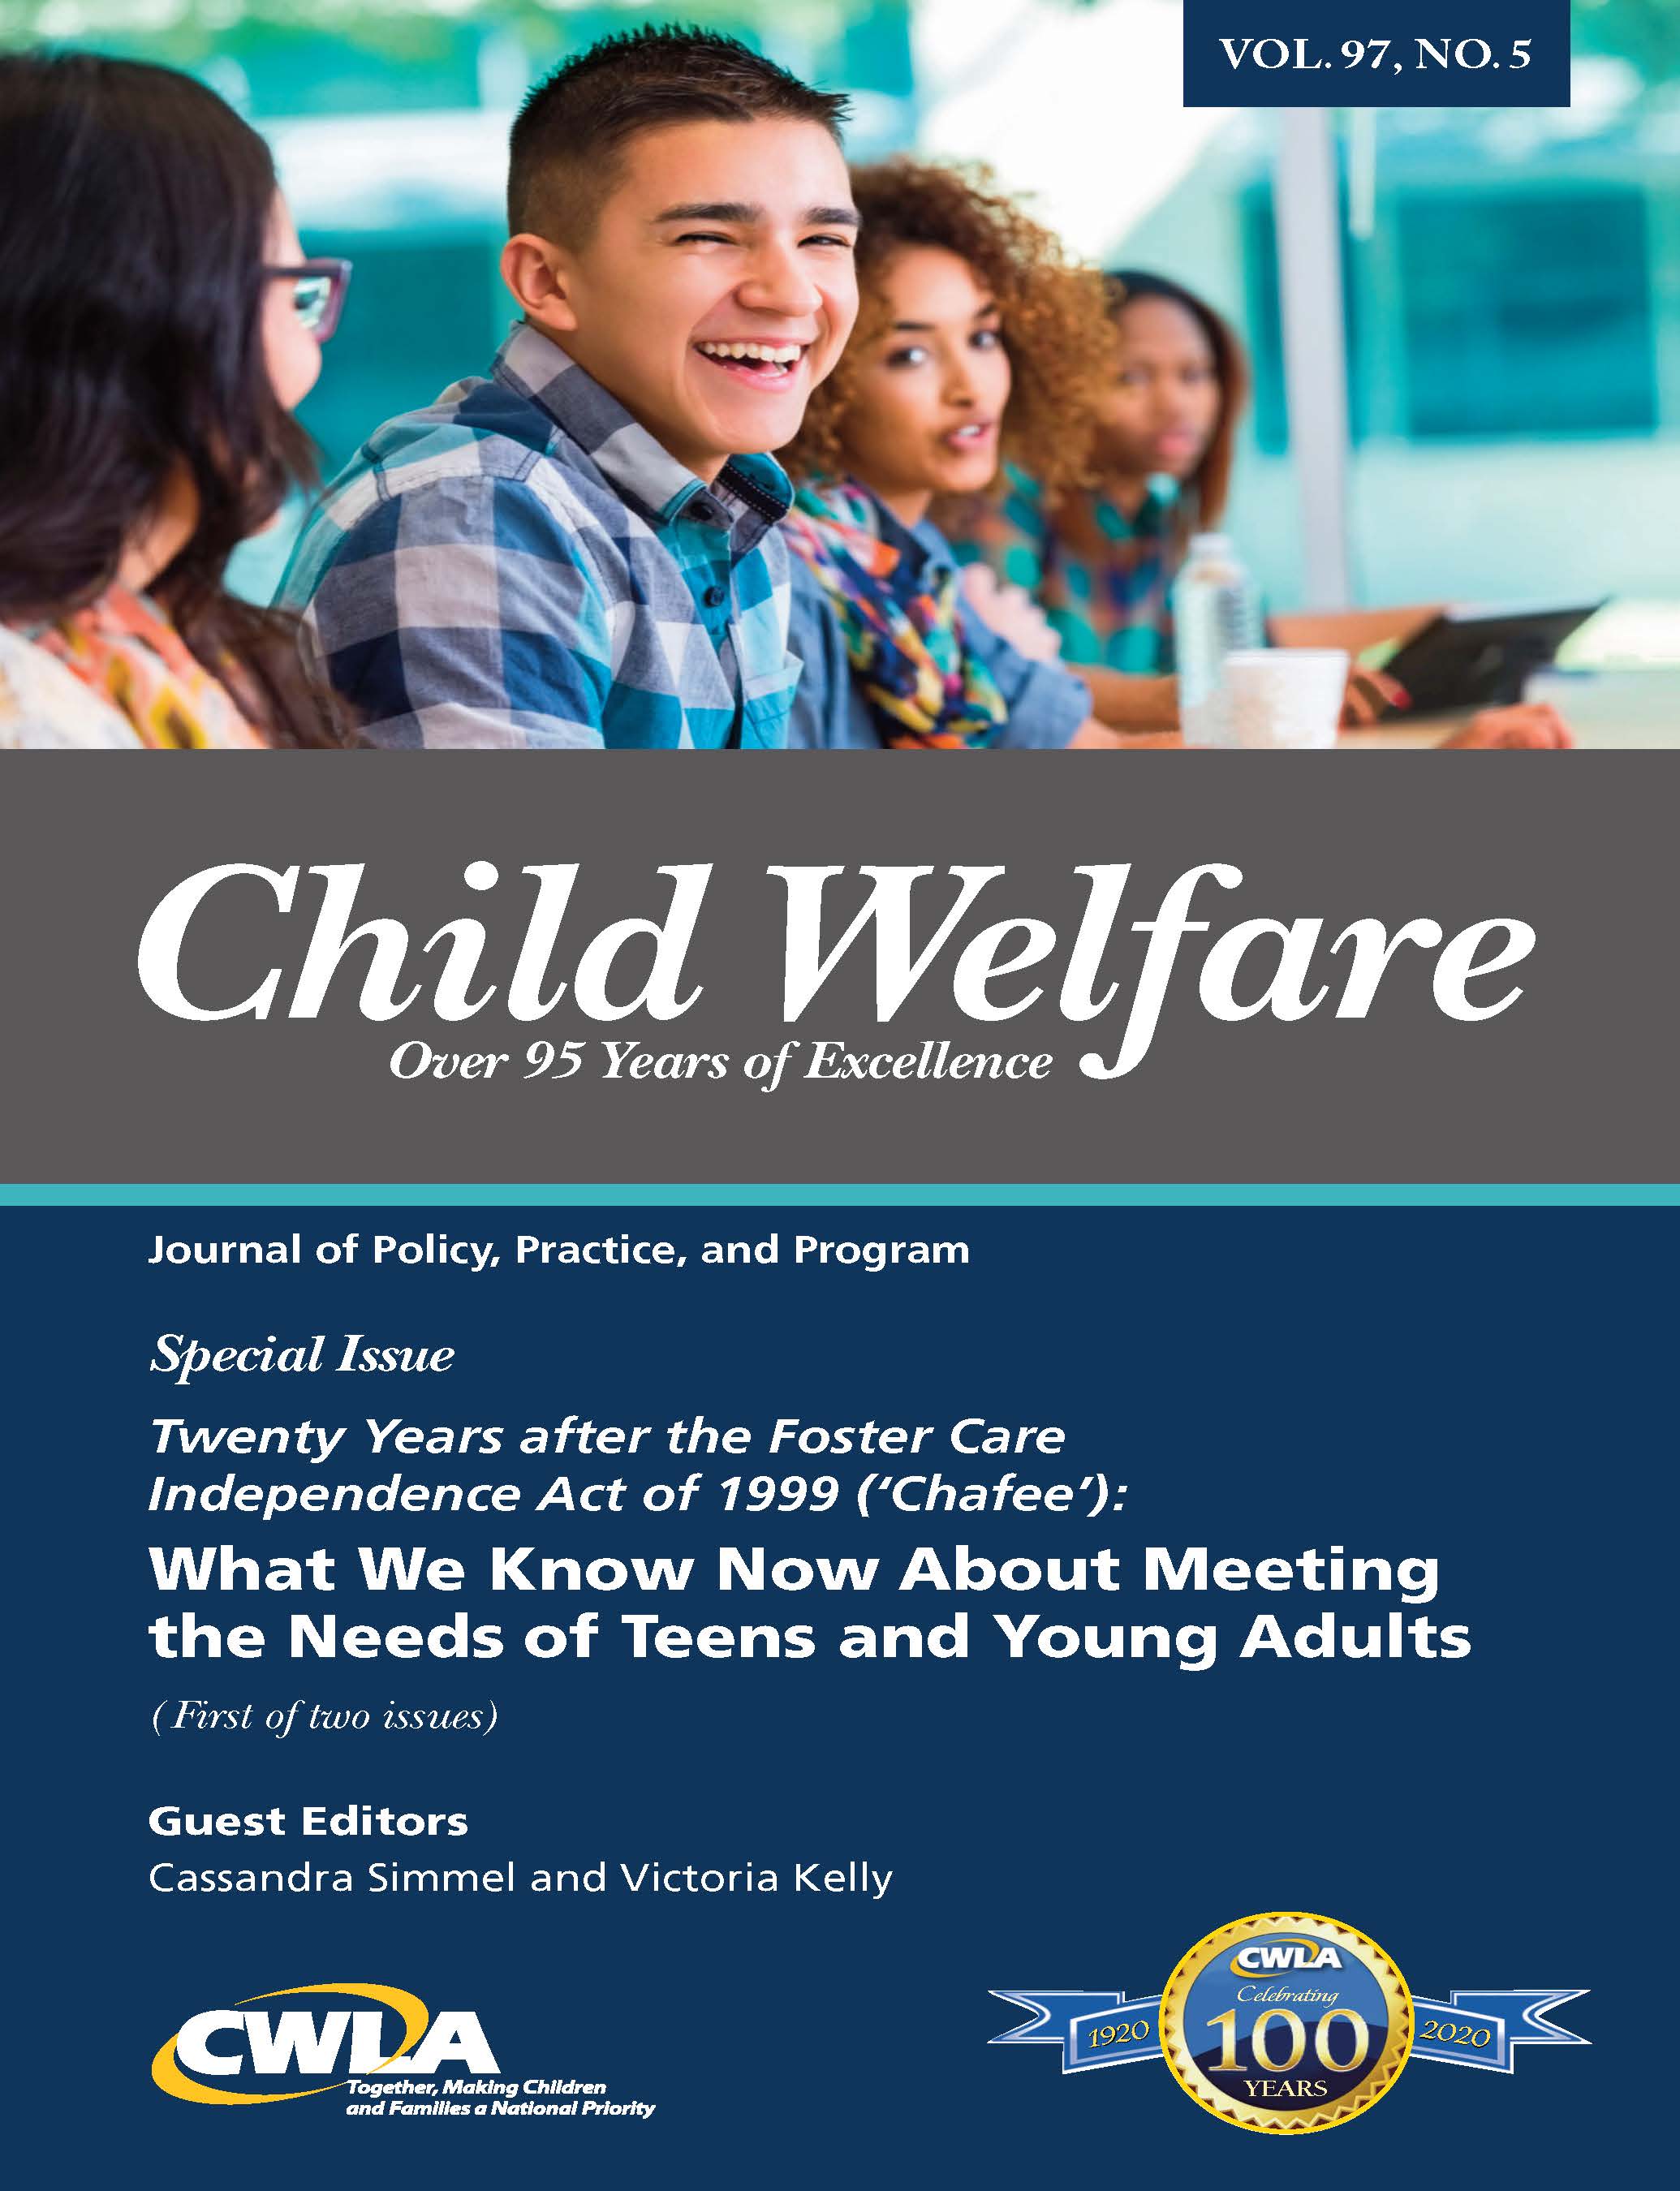 Child Welfare Journal Vol. 97, No. 5 Special Issue: Teens & Young Adults (Digital PDF)